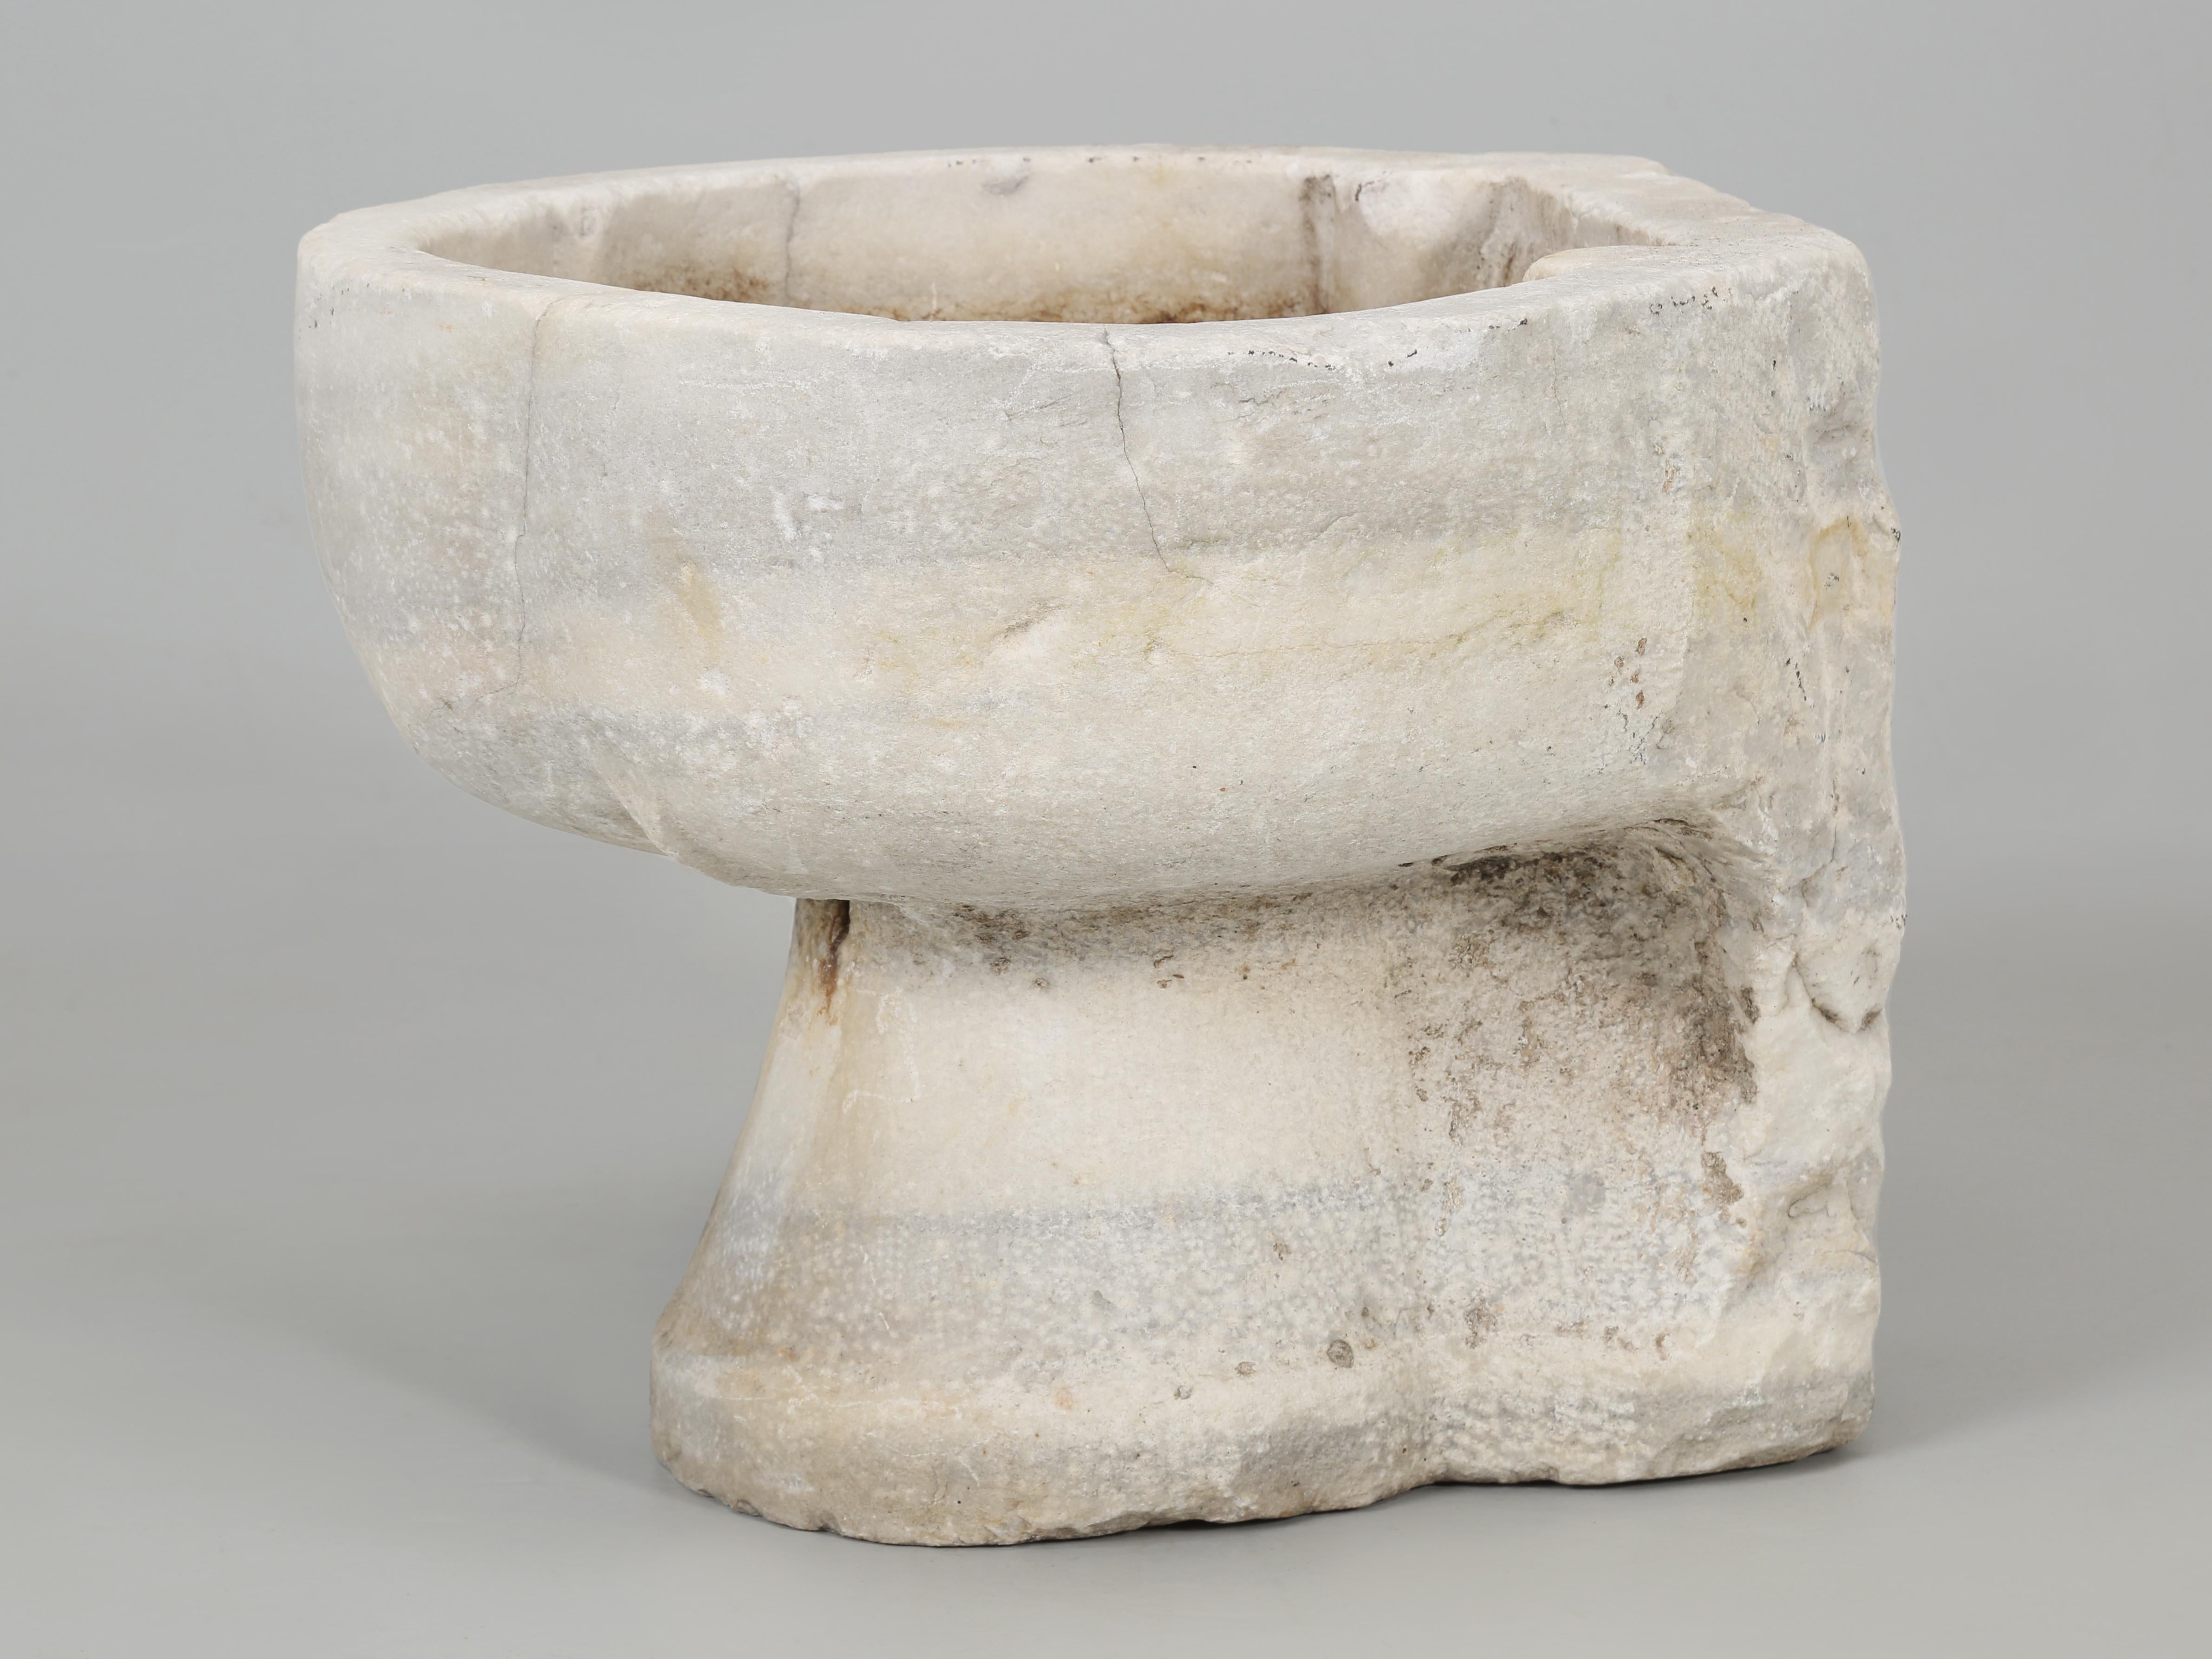 Rustic Antique Carved Solid Block of Marble Wash Basin, Sink From Mediterranean Region For Sale